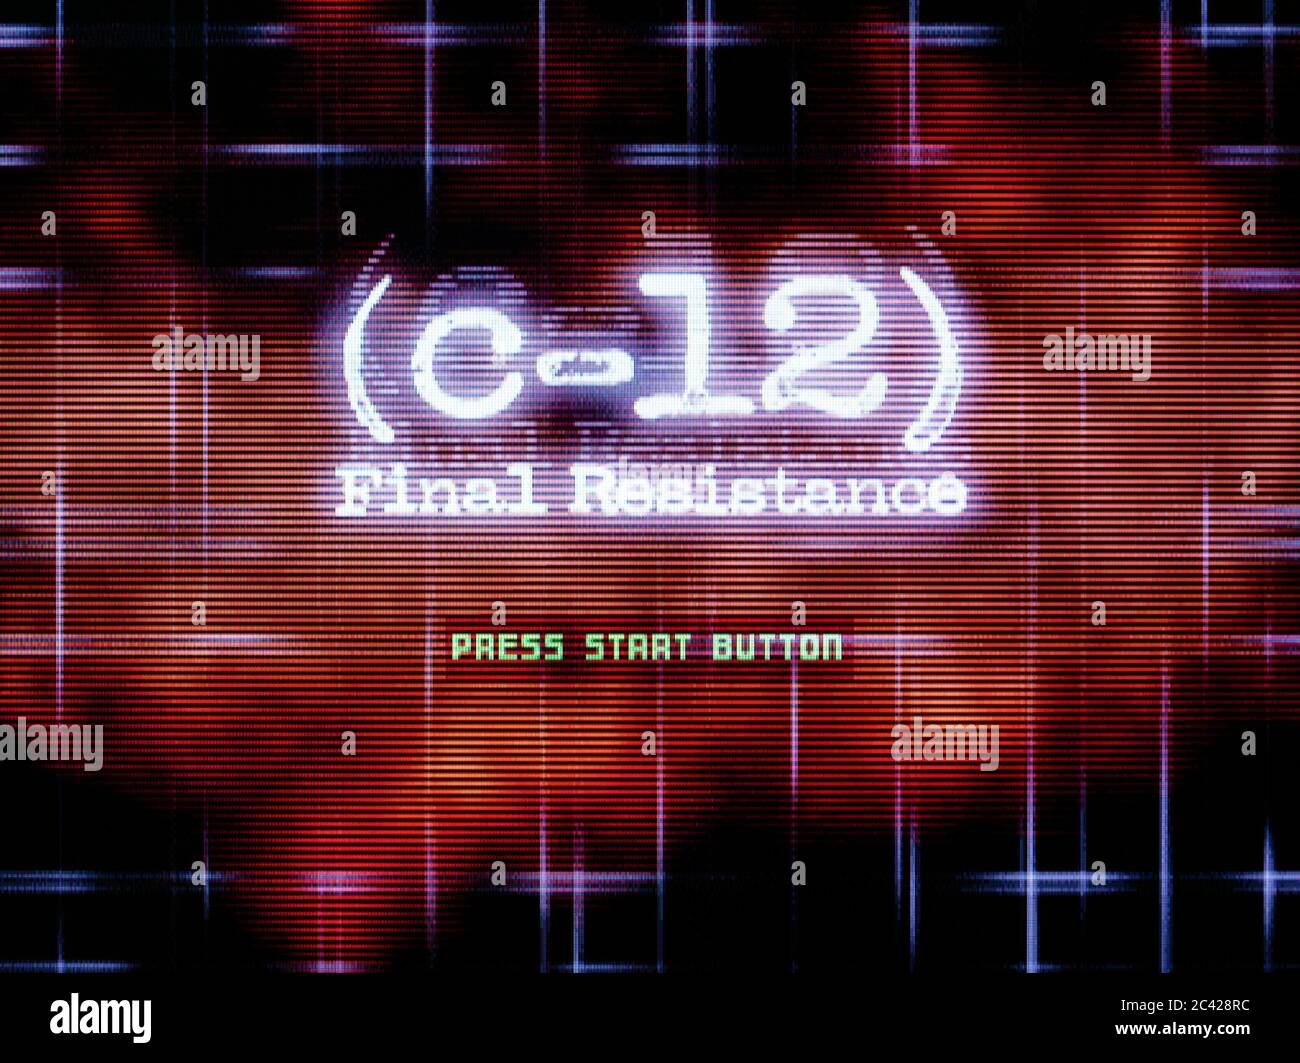 C-12 Final Resistance - Sony Playstation 1 PS1 PSX - Editorial use only Stock Photo